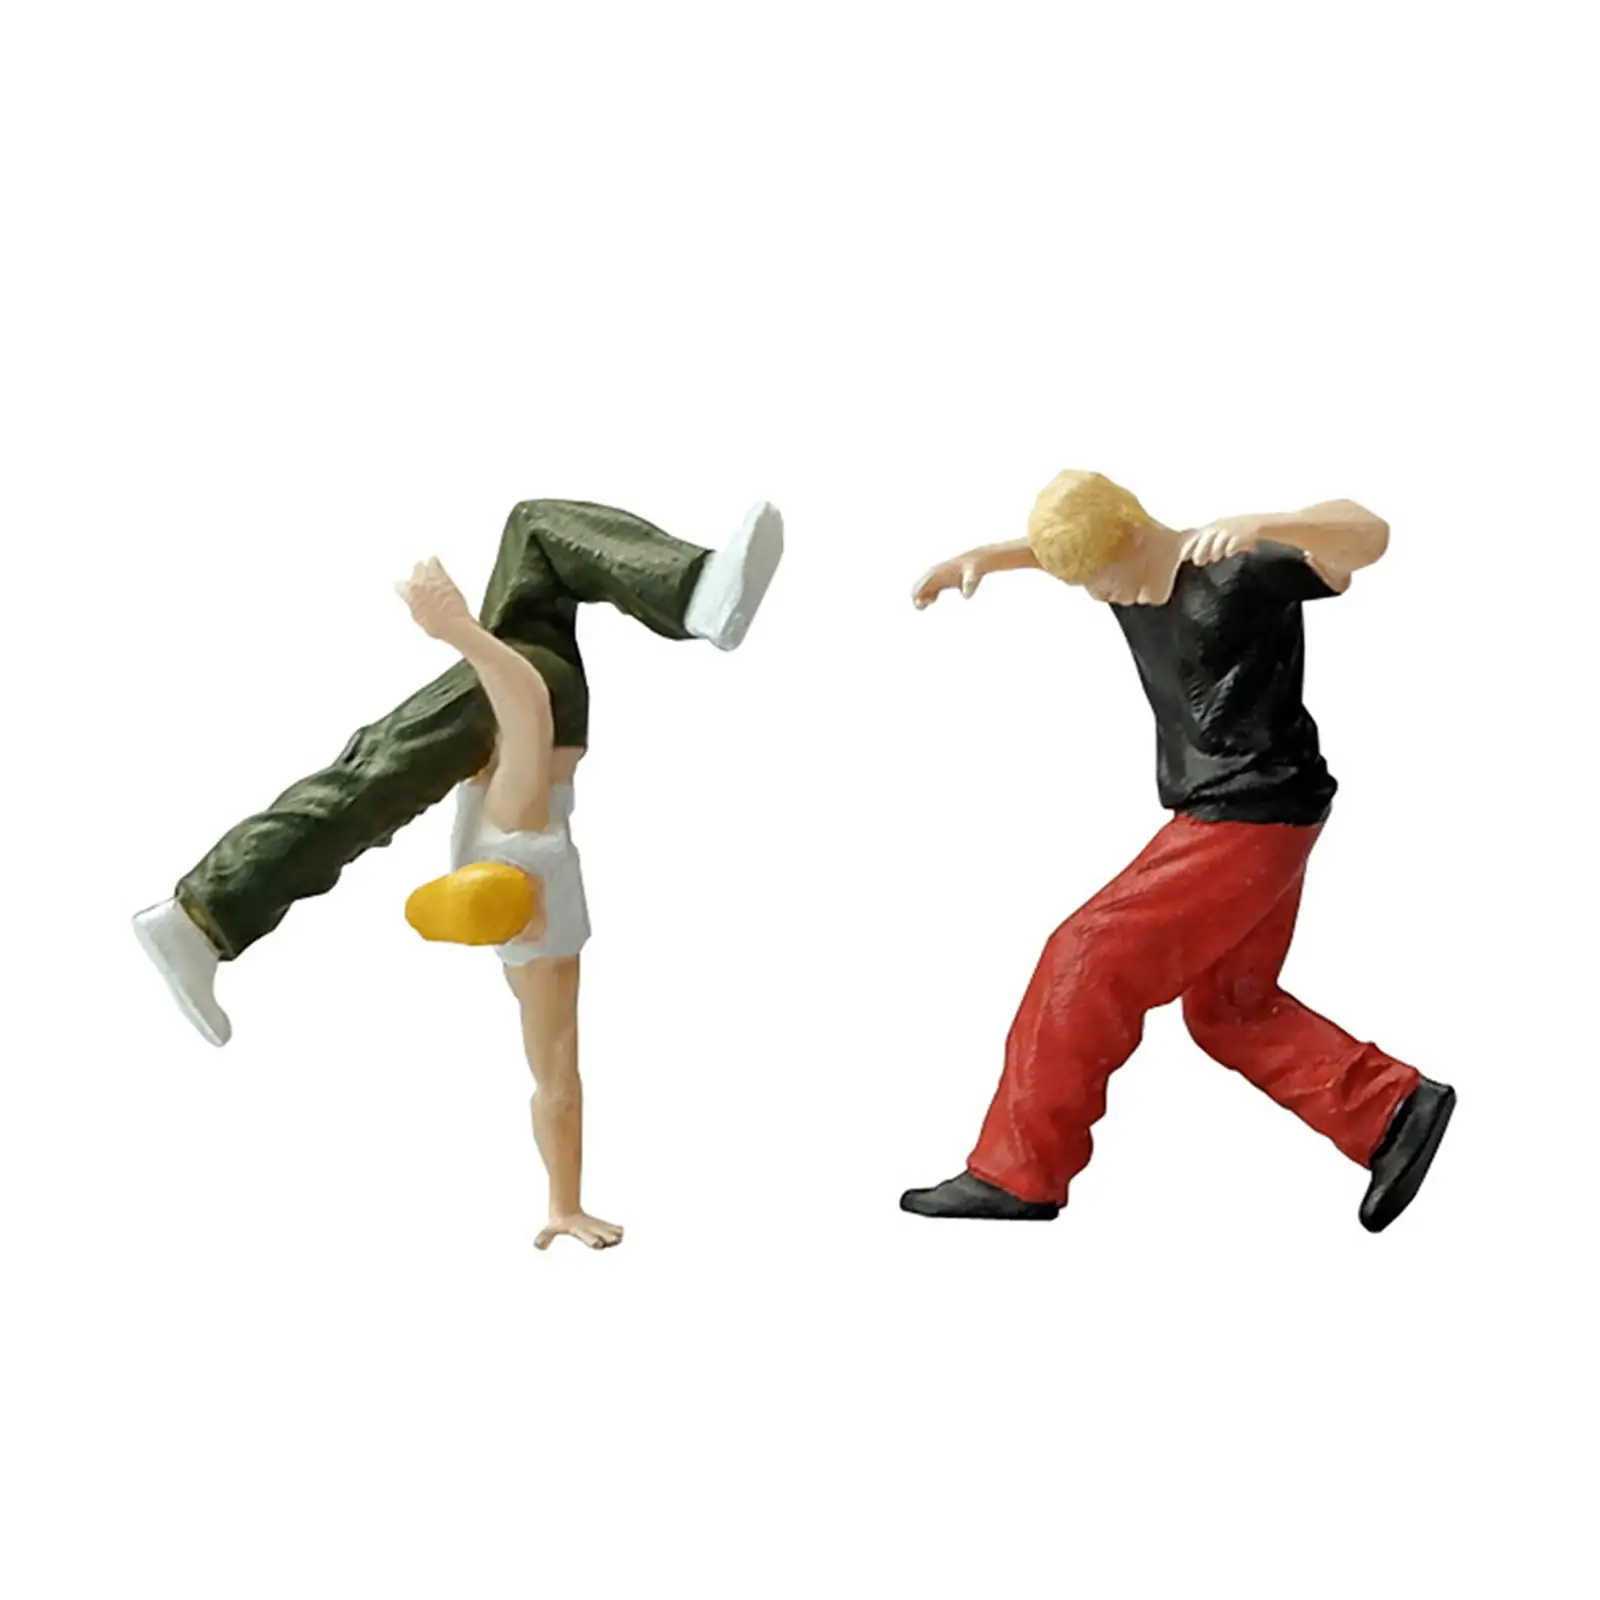 1/64 Scale Figure Street Dancer Model Handpainted for Micro Landscape Layout